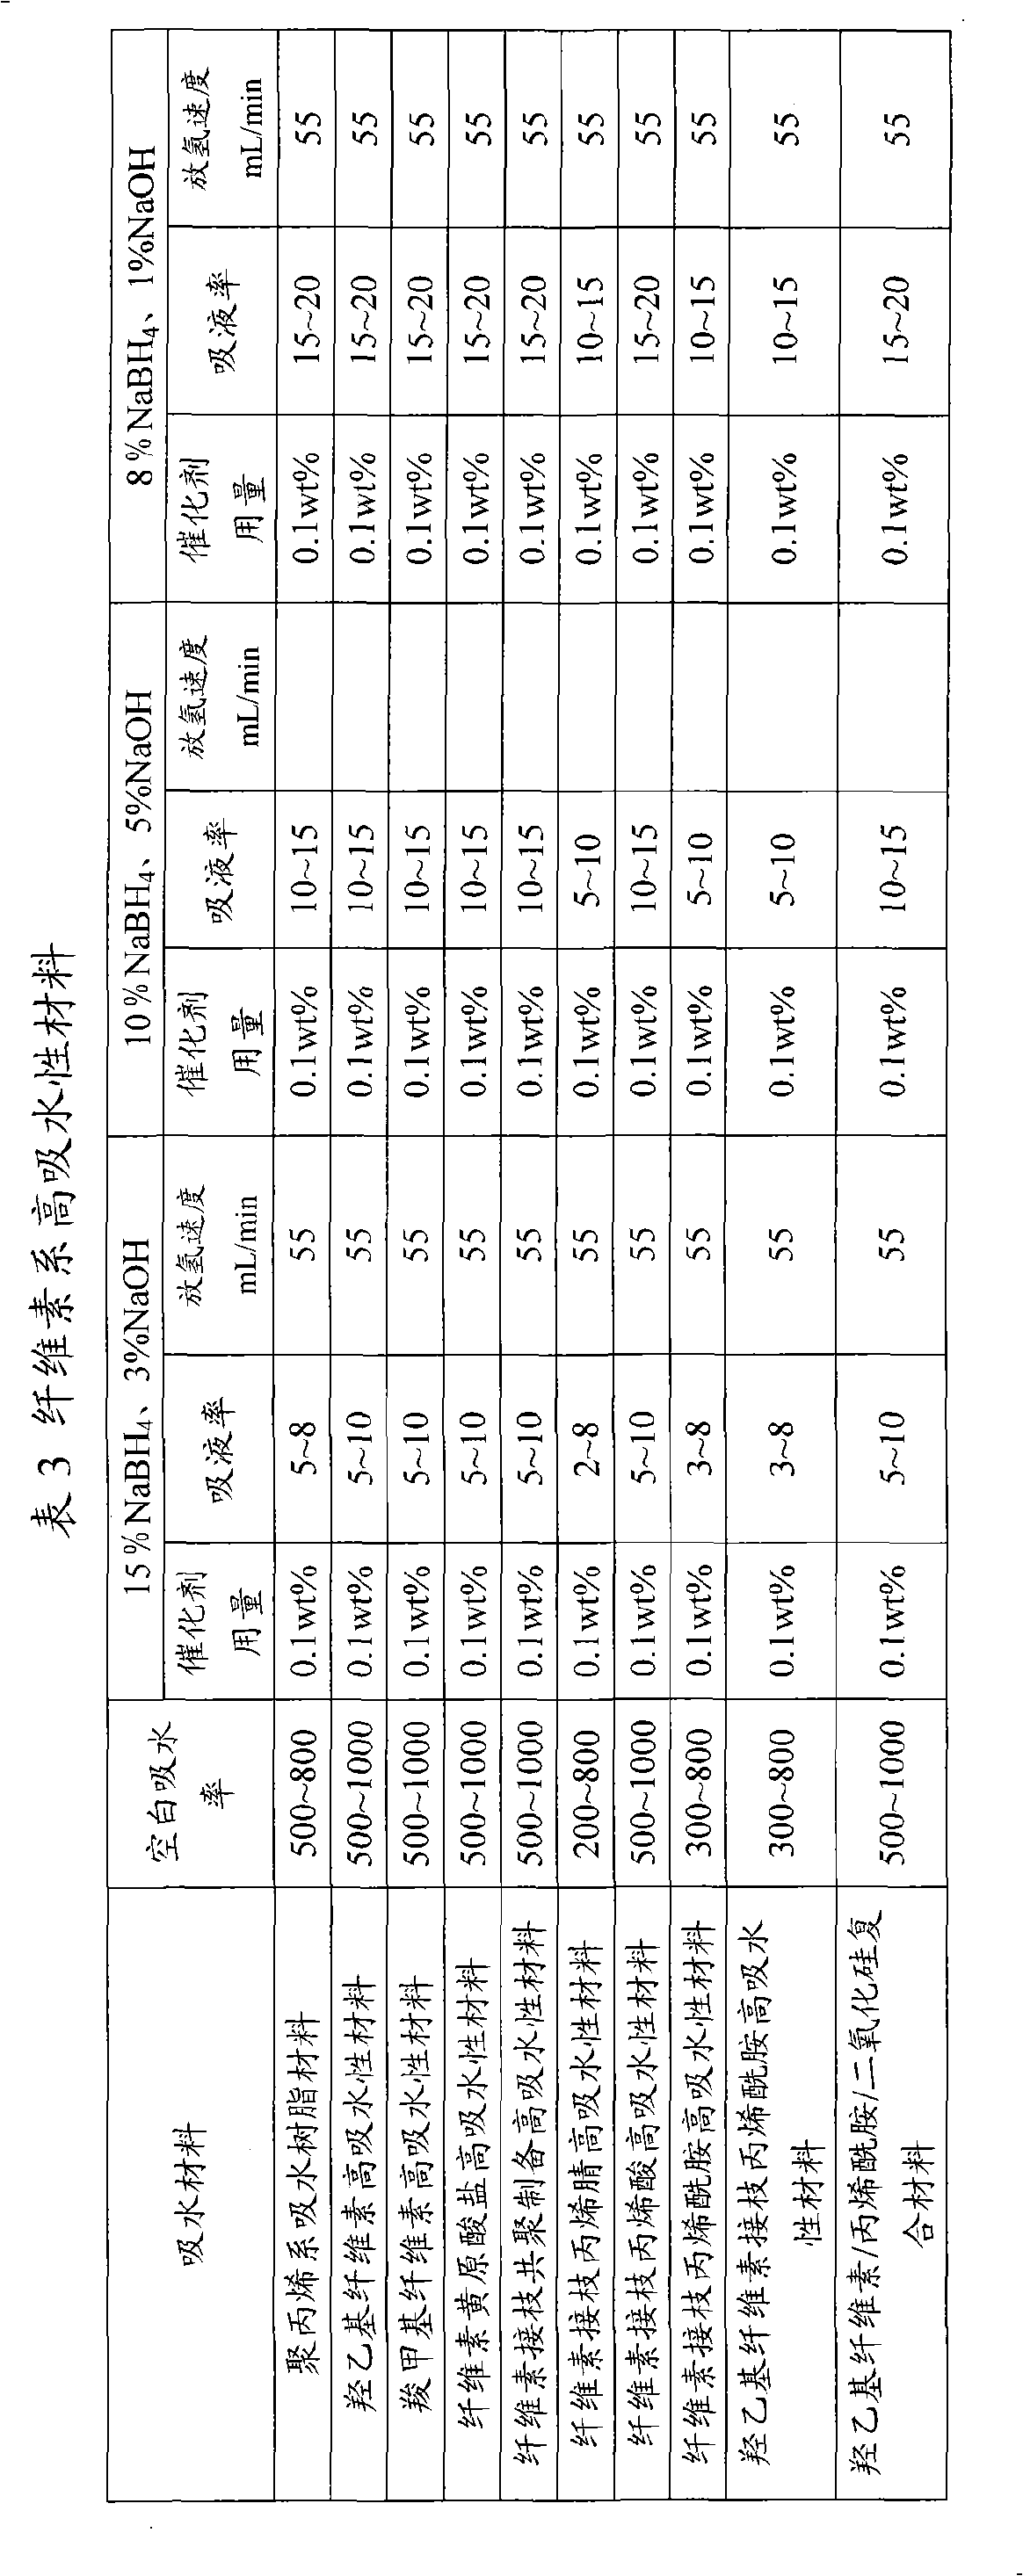 Hydrogen storage material, preparation and use thereof